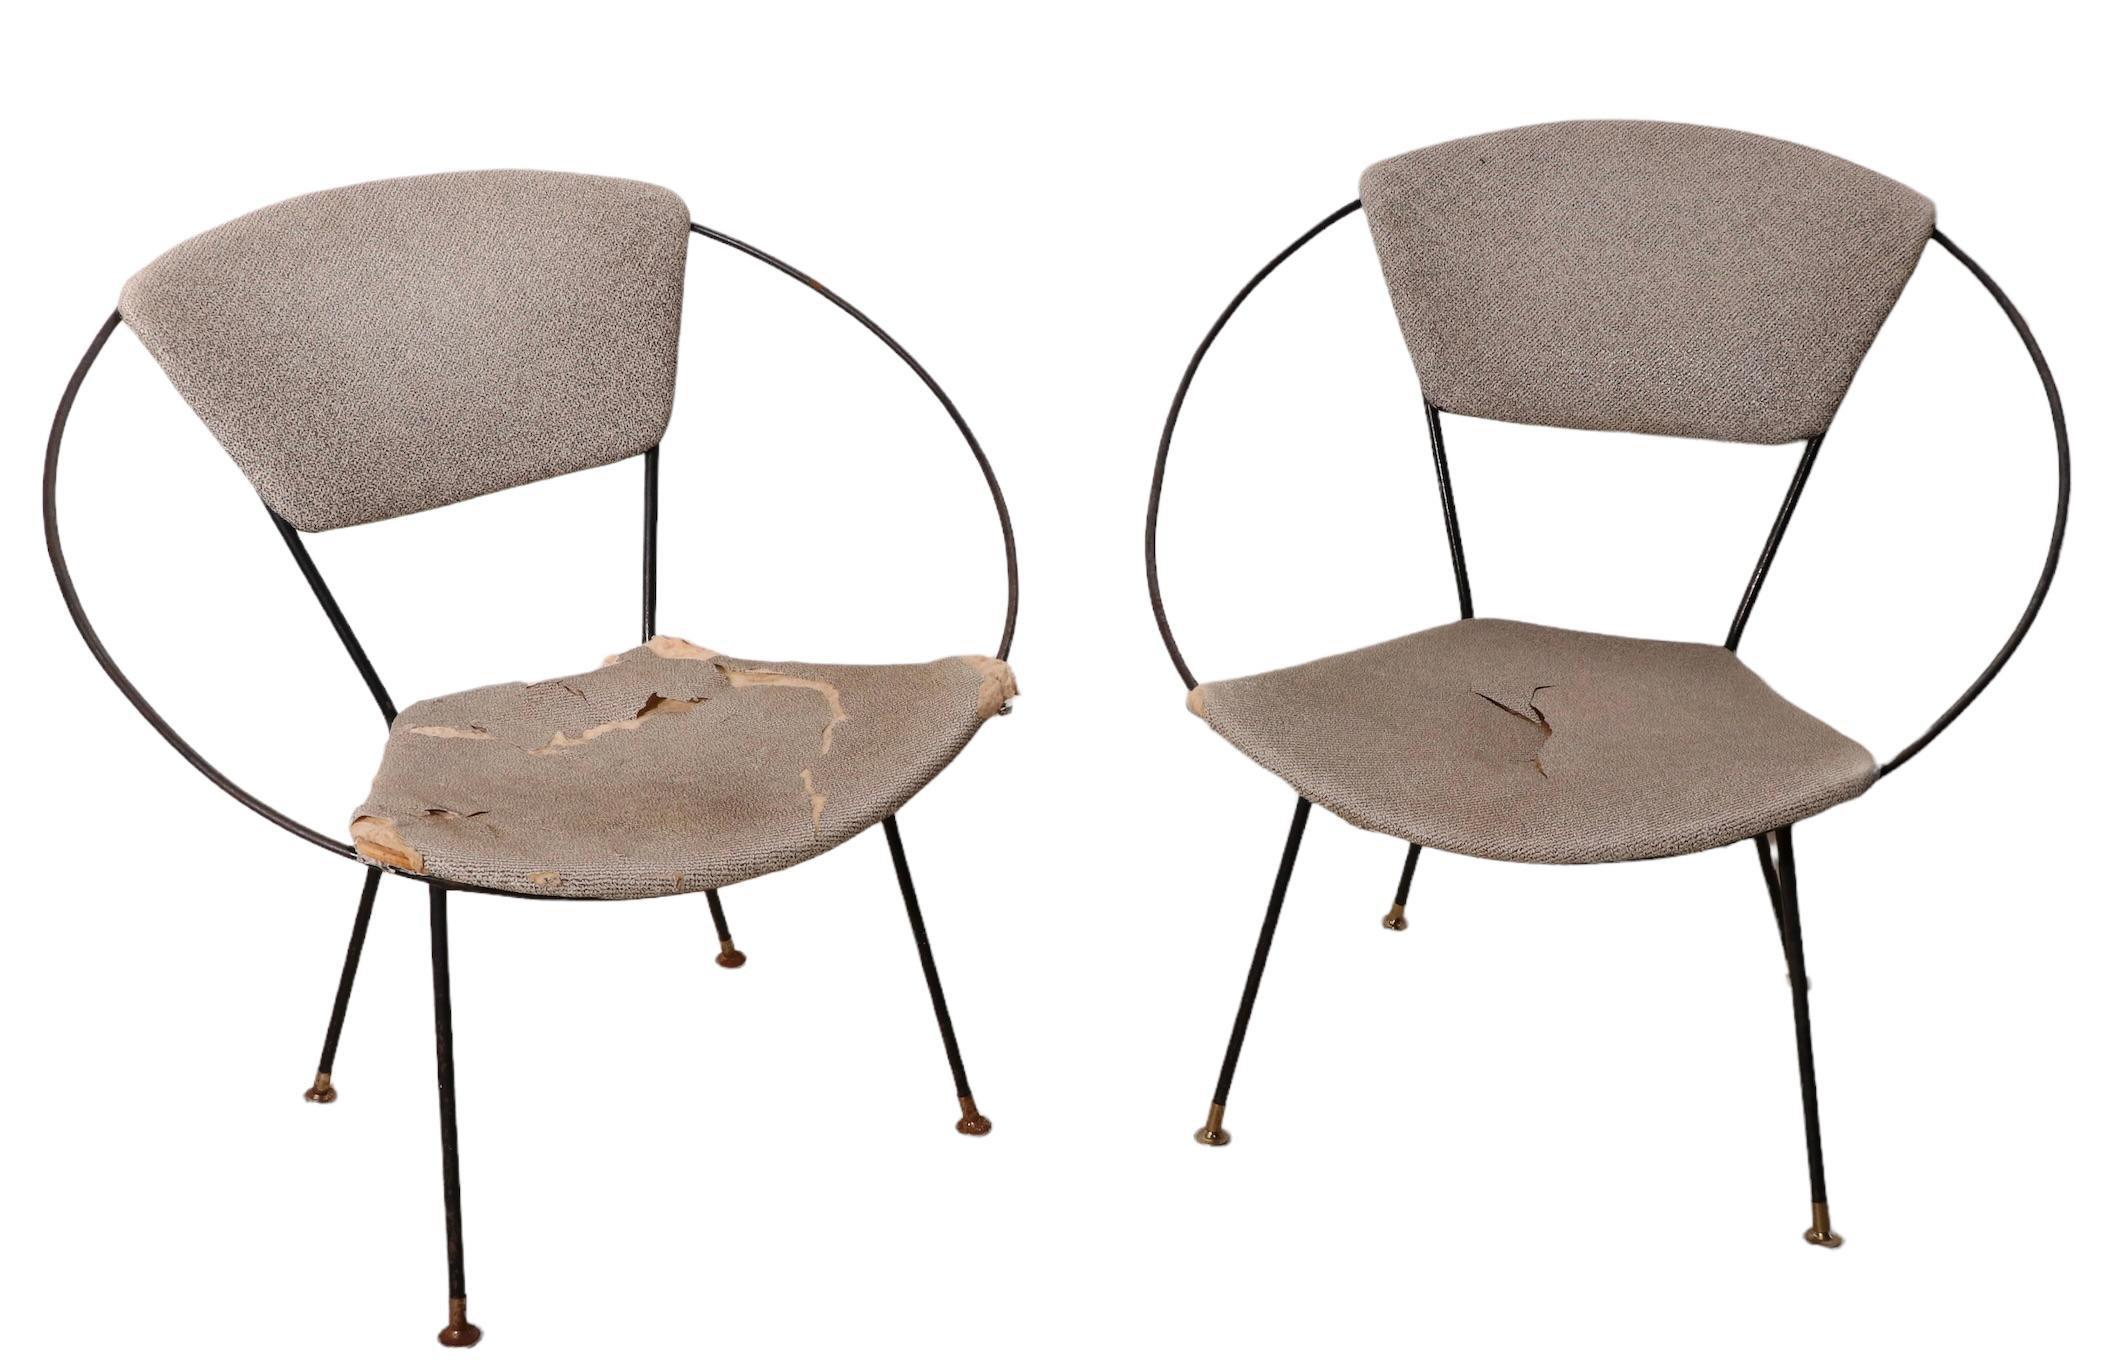 Upholstery Pr. Wrought Iron Mid Century Hoop Chairs by John Cicchelli for Riley Wolff 1950s For Sale